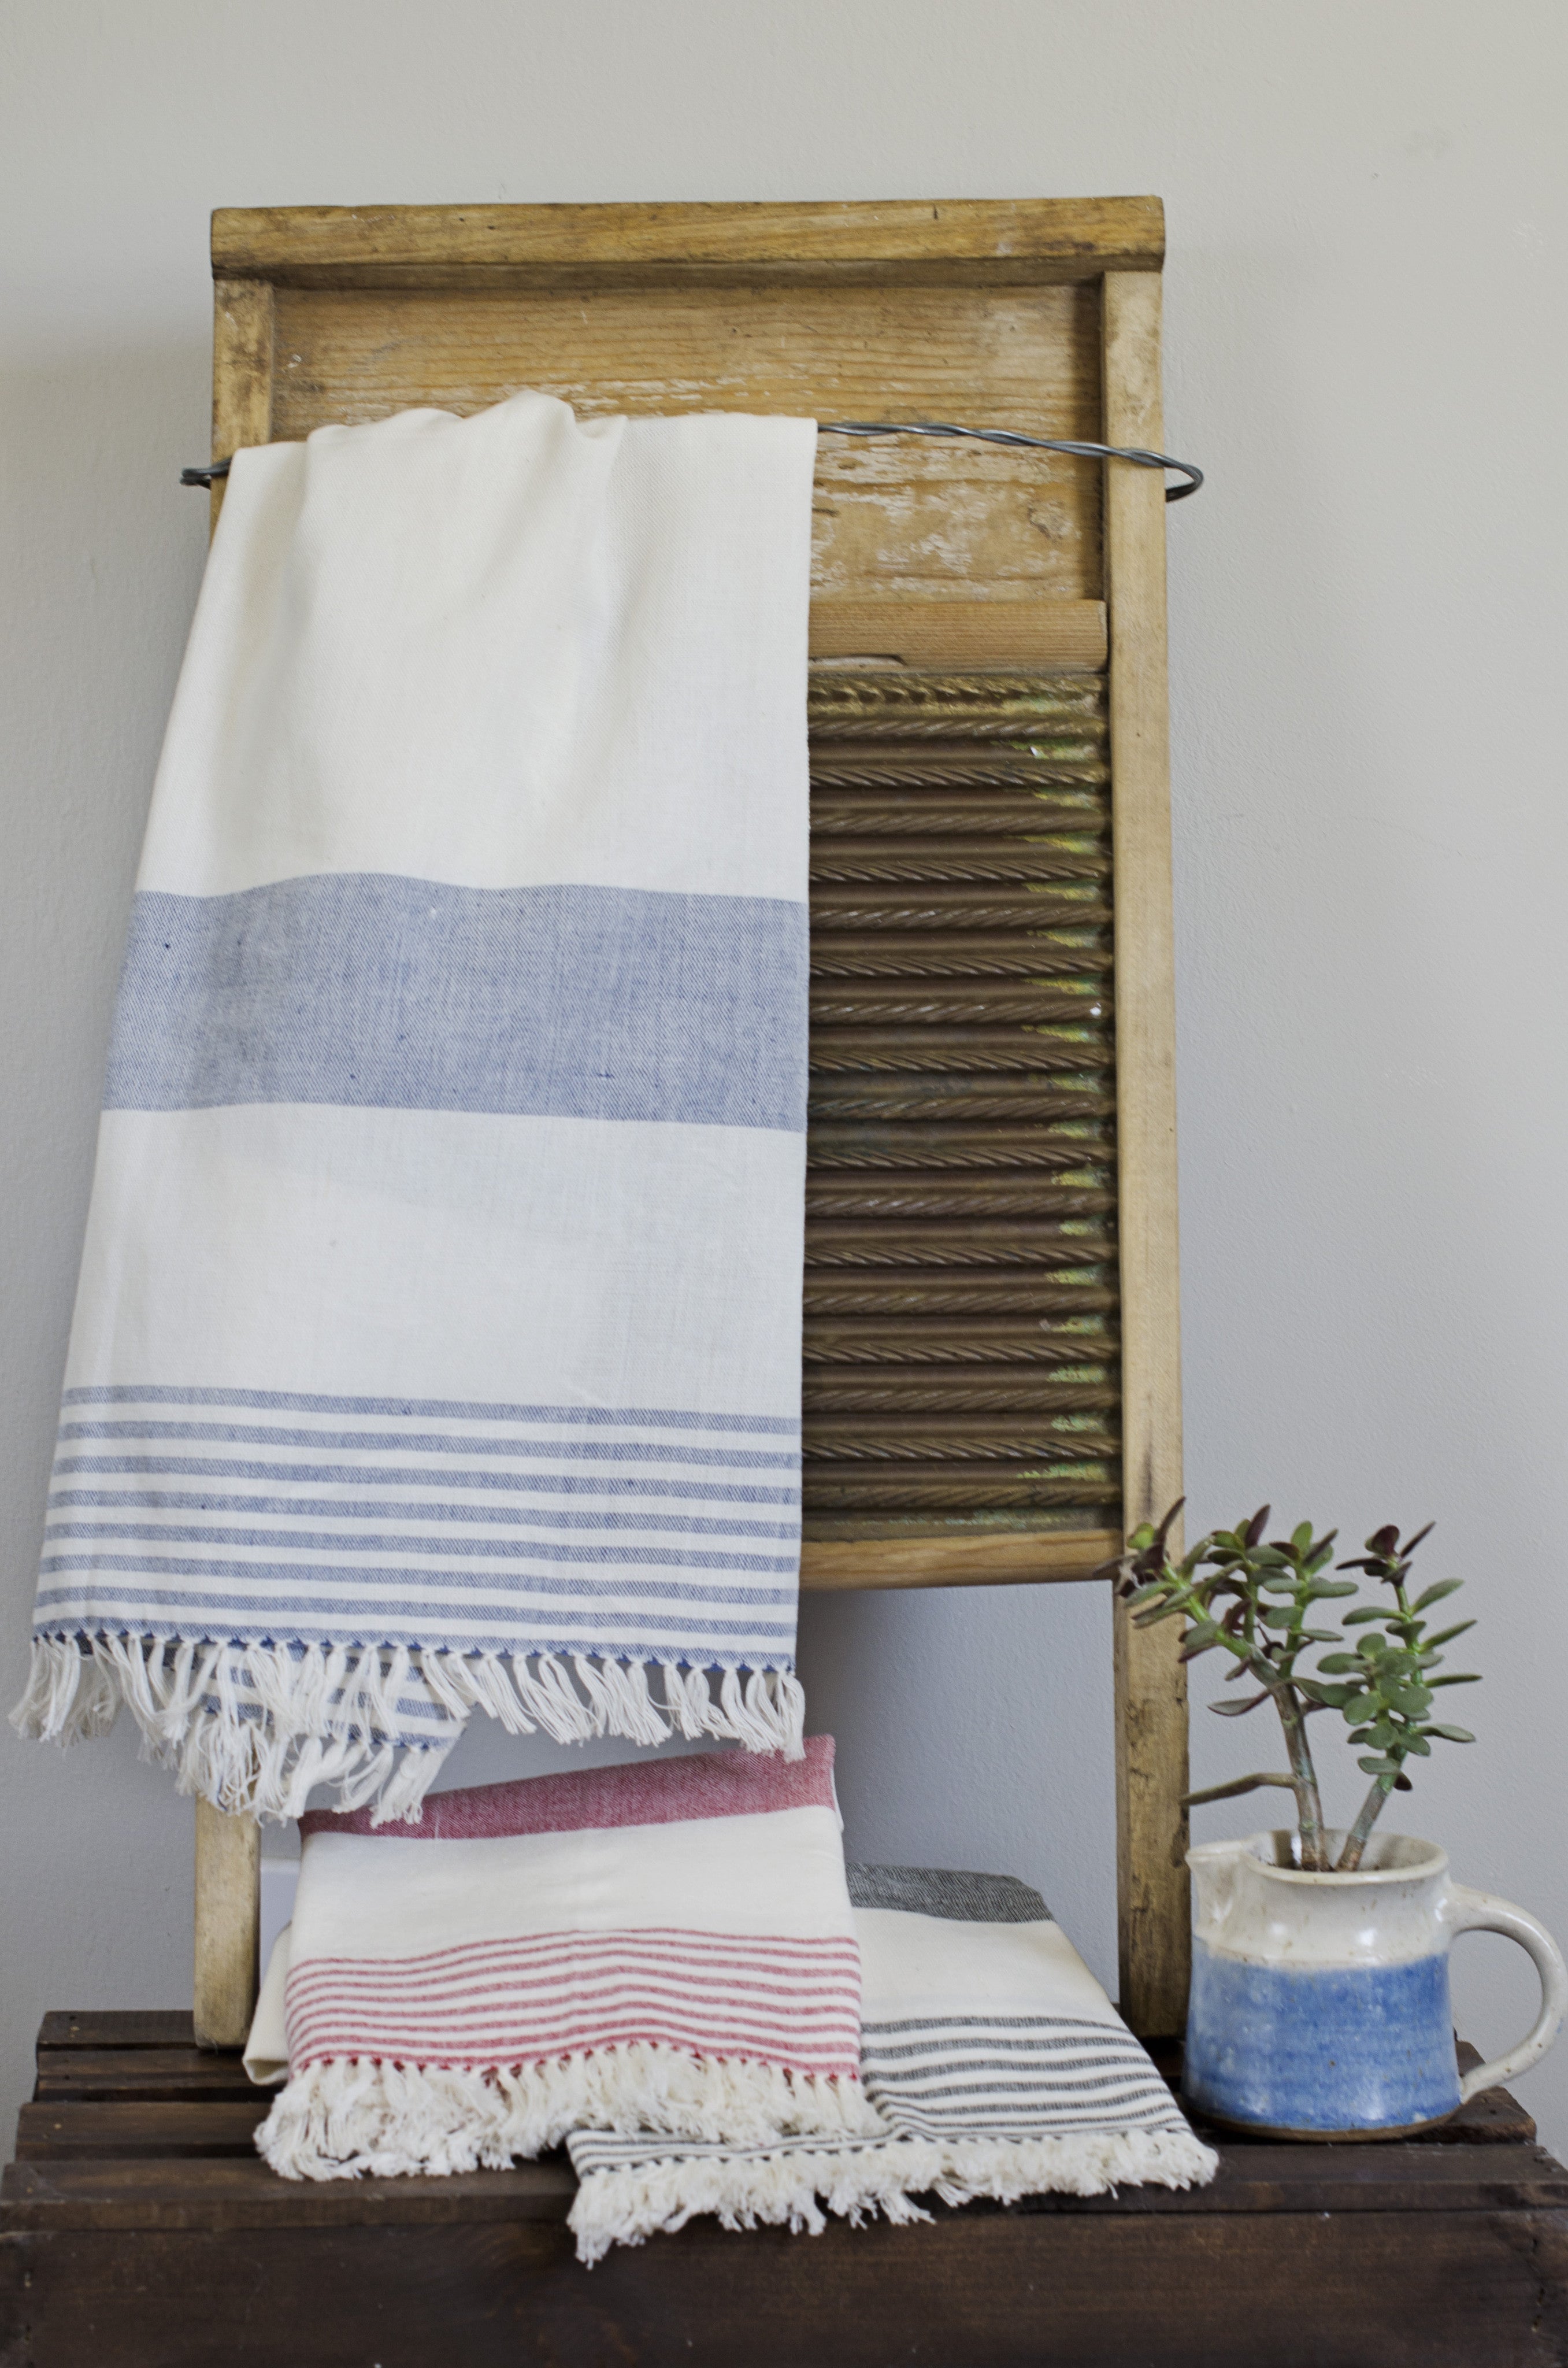 Handwoven Kitchen Towels, Organic Cotton Fall Inspired Towels